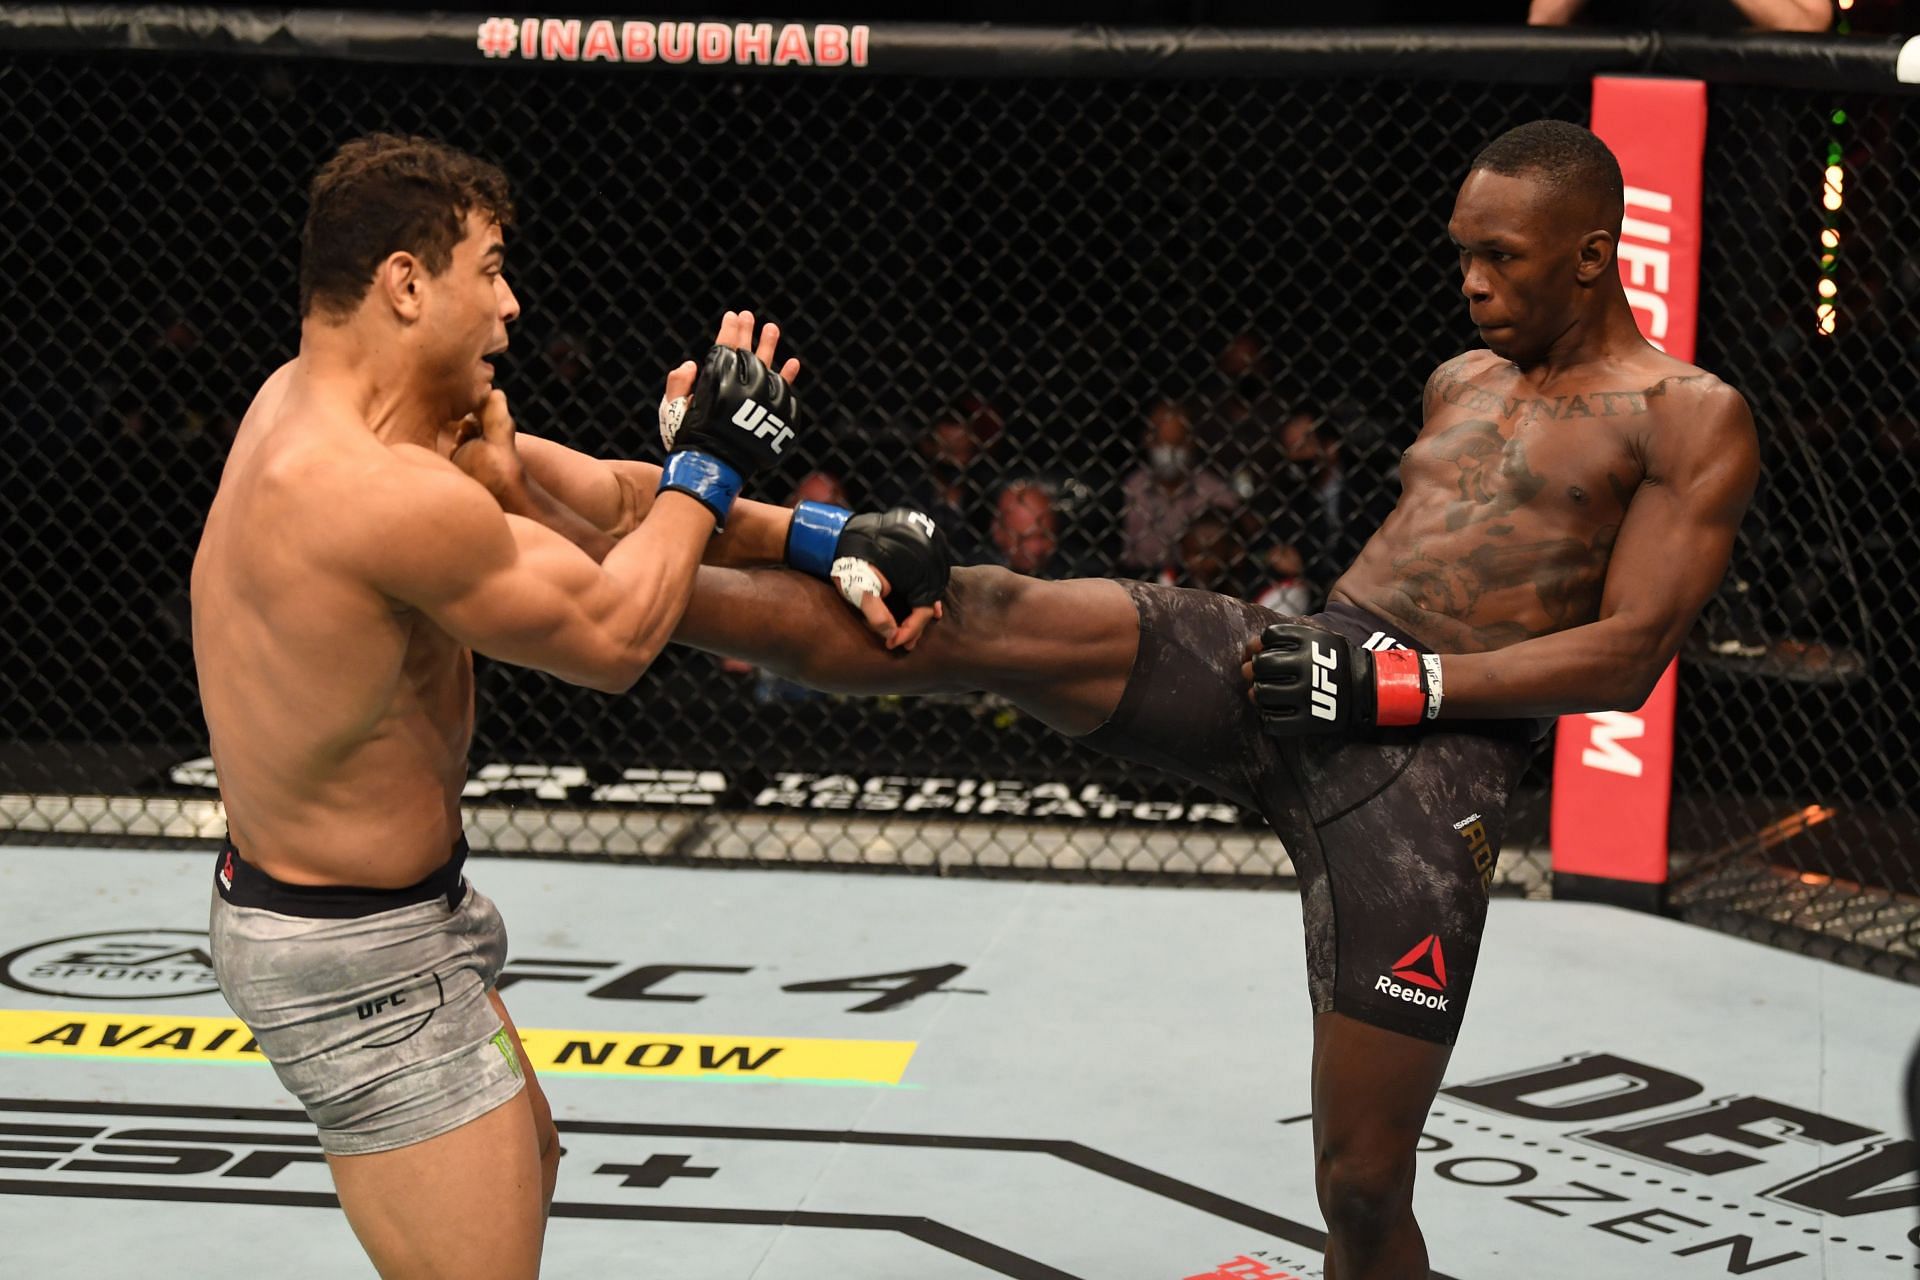 Israel Adesanya has never had a truly epic rivalry in the UFC